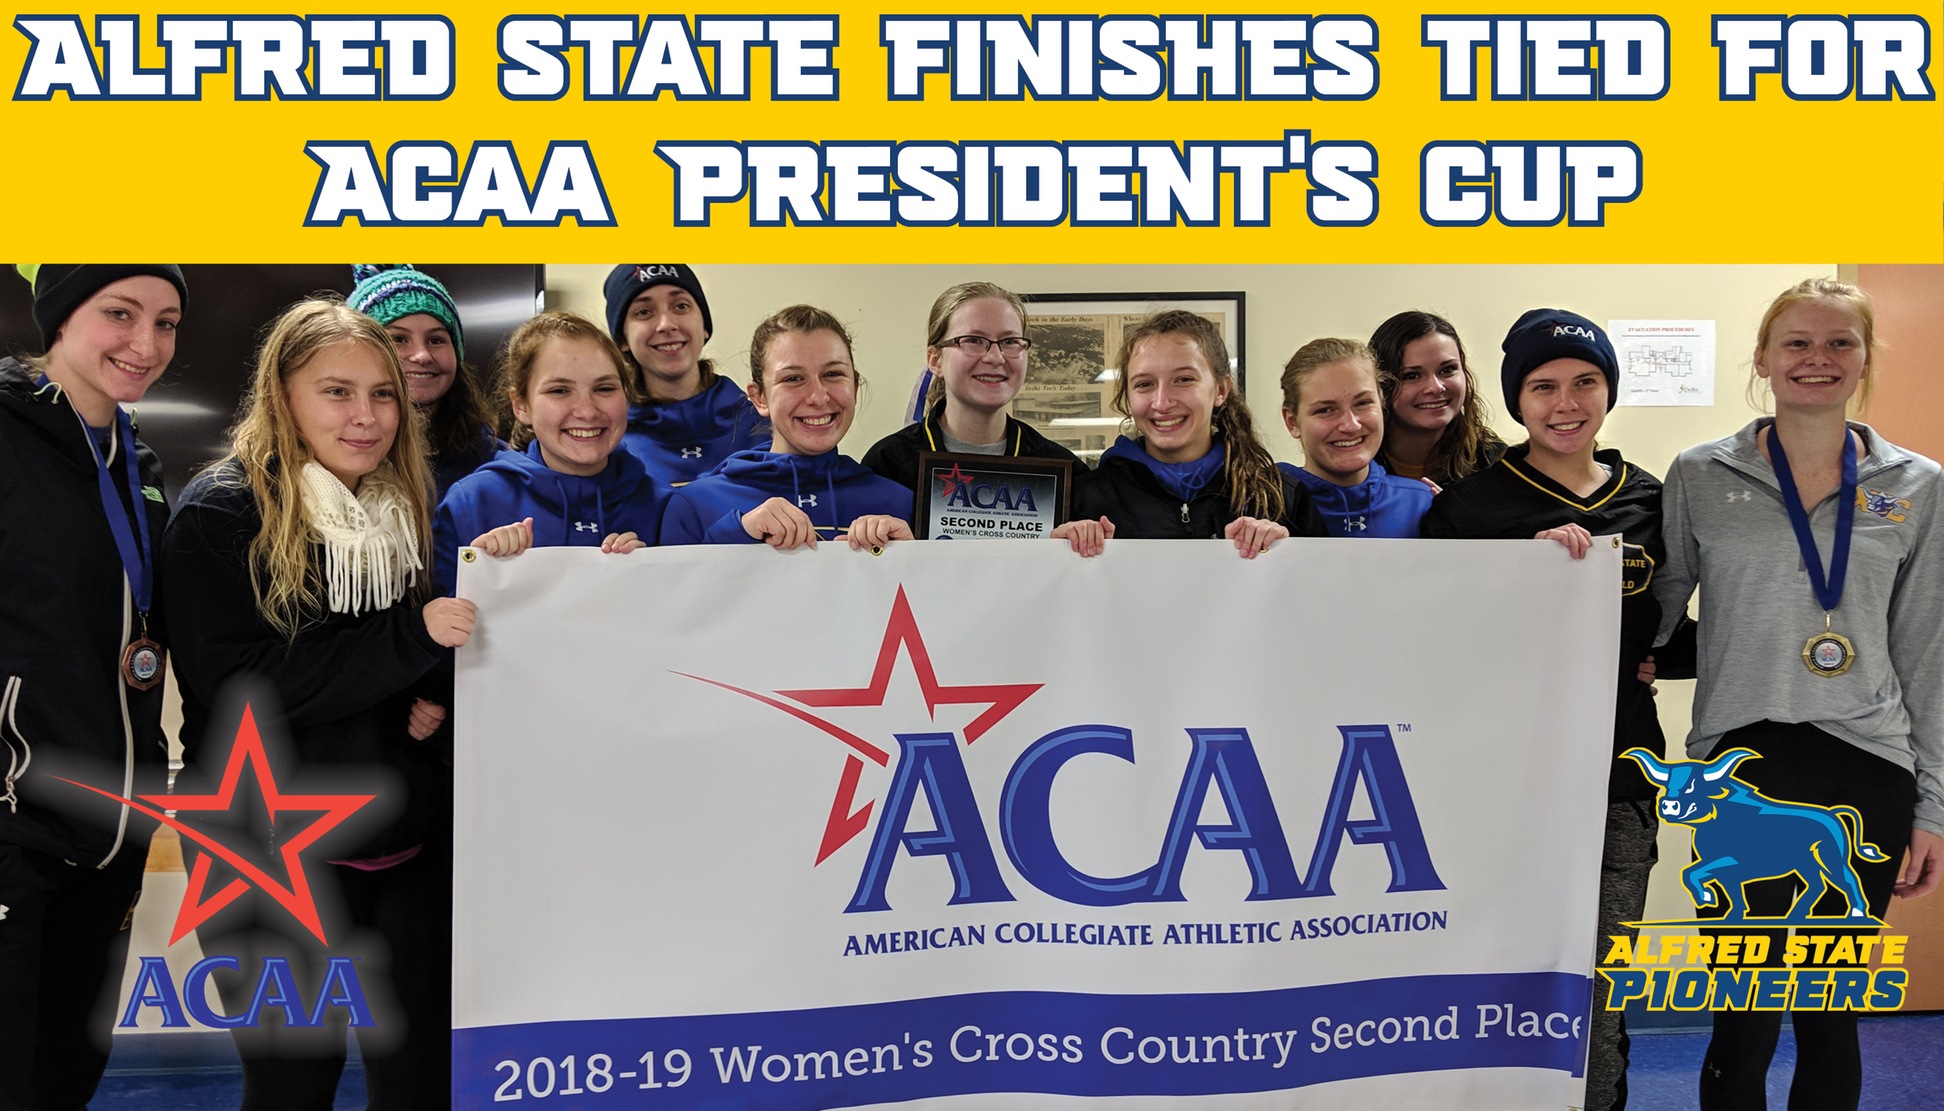 Alfred State finishes tied for ACAA President's Cup